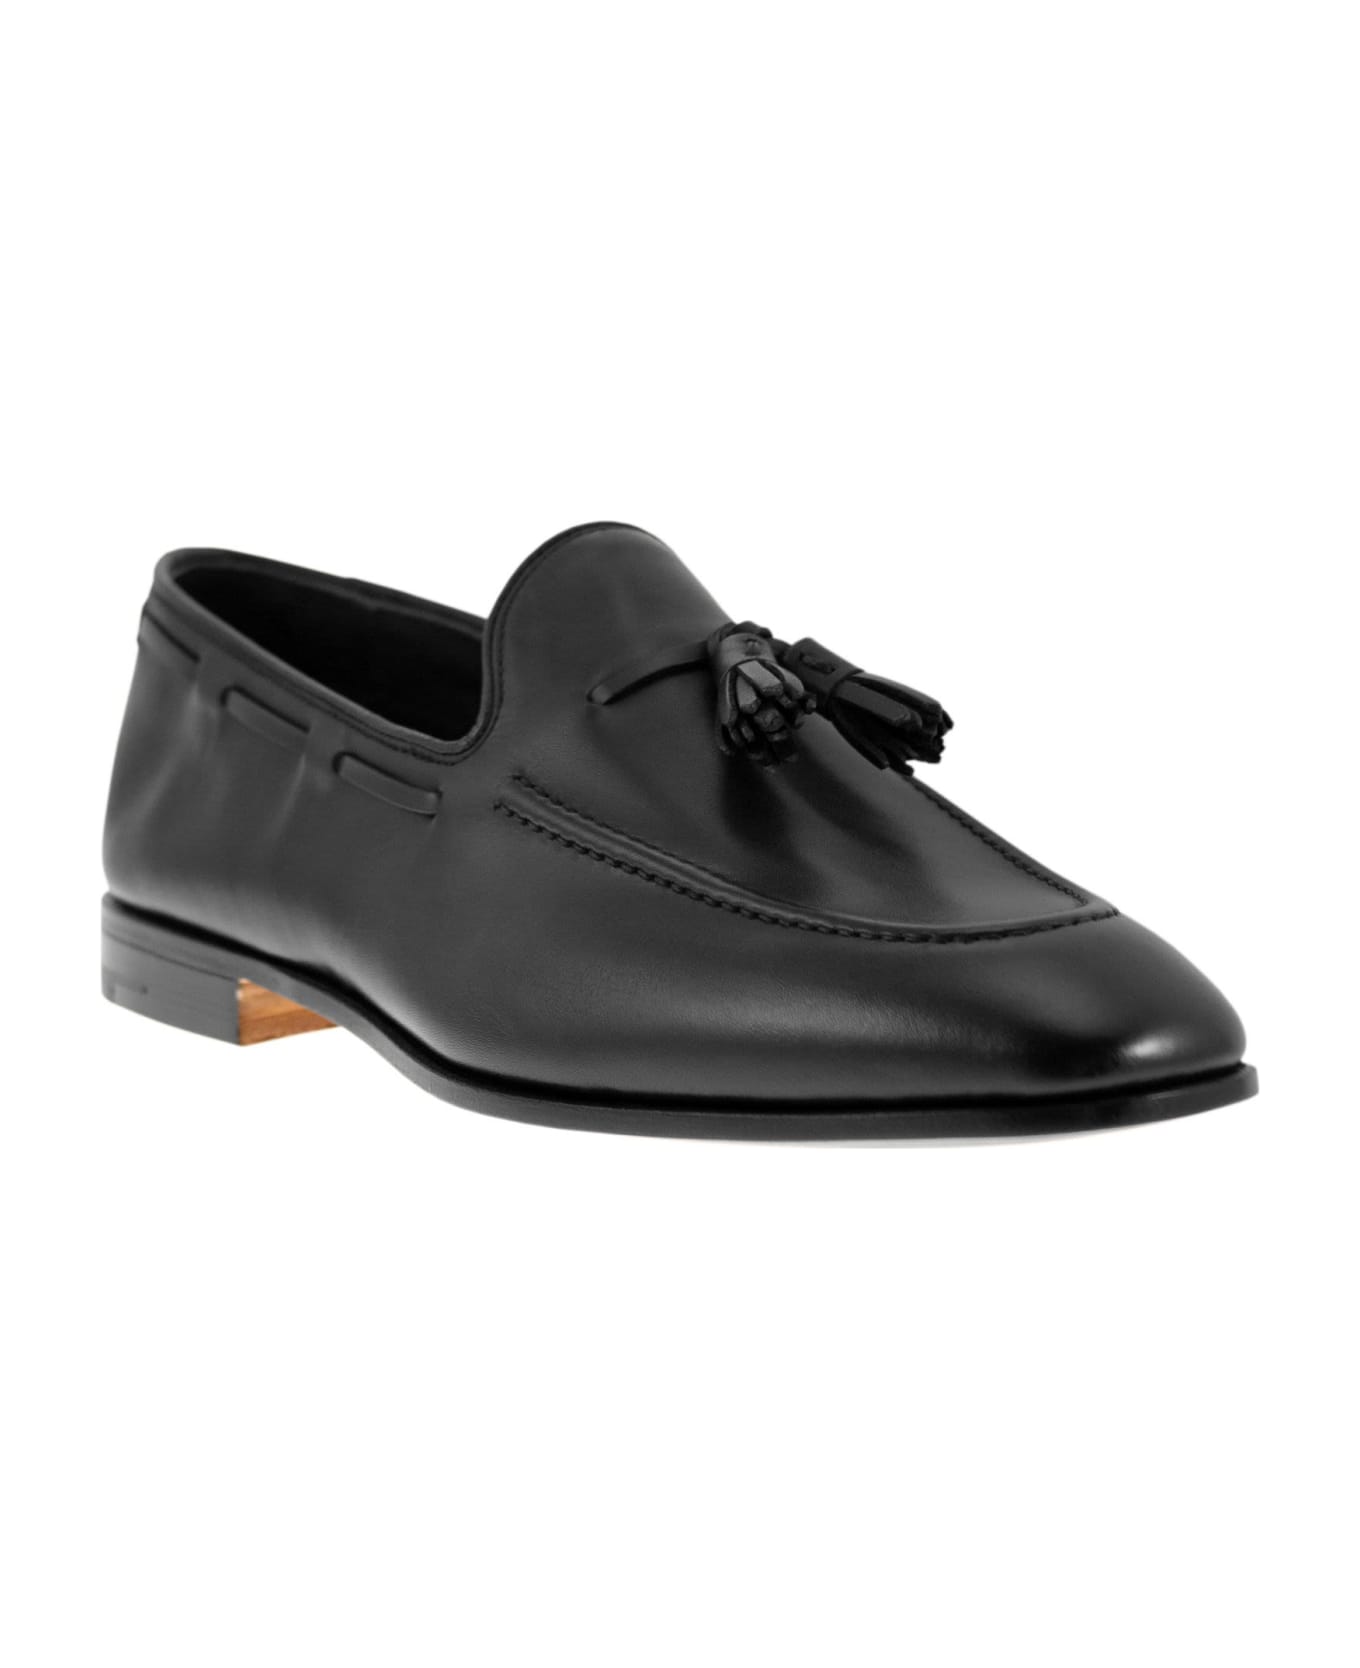 Church's Brushed Calf Leather Loafer - Black